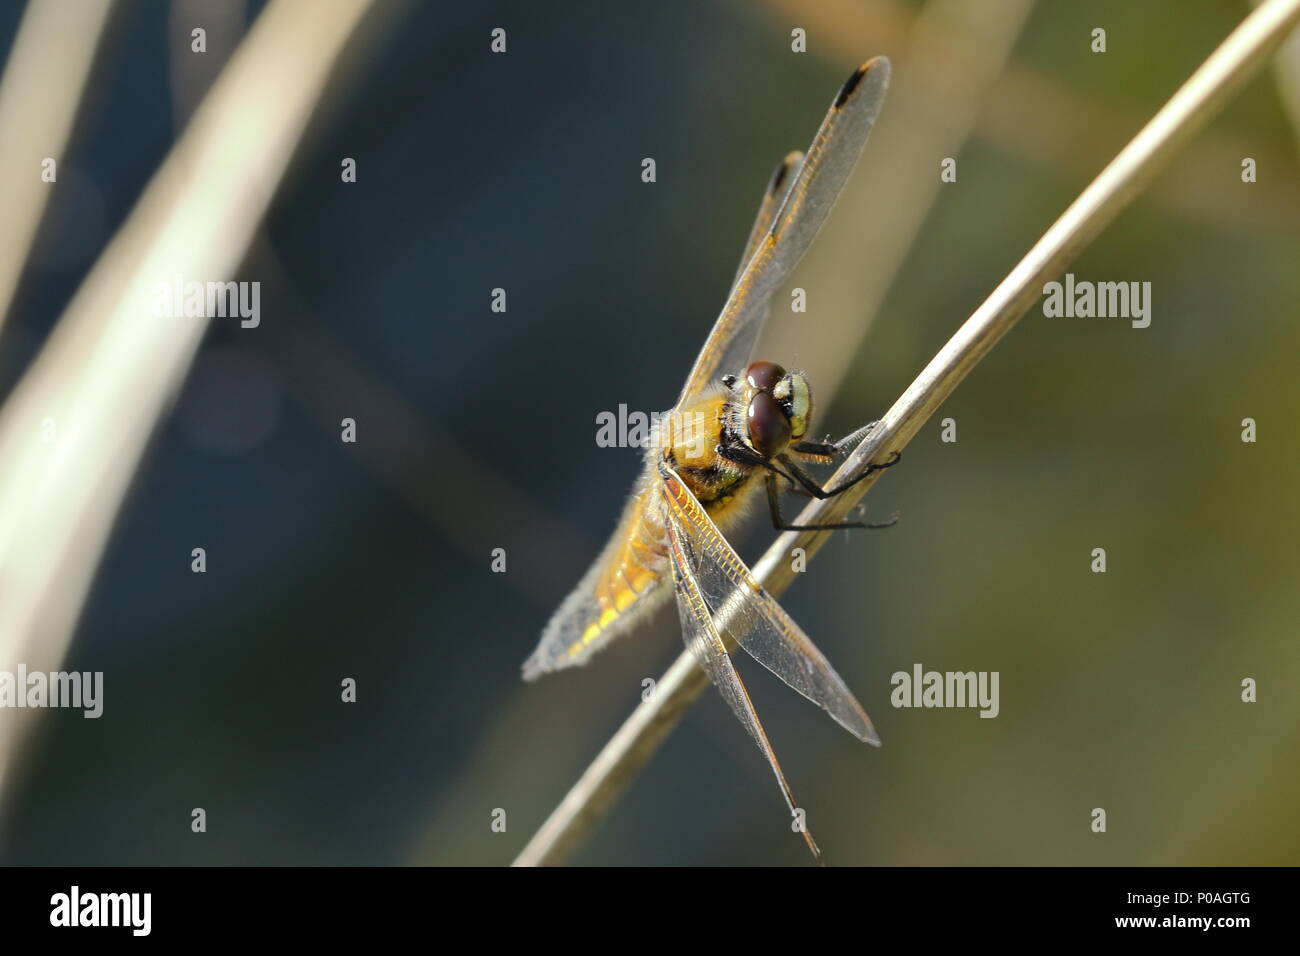 Four-spotted chaser, or four-spotted skimmer, is a dragonfly of the family Libellulidae. UK Stock Photo